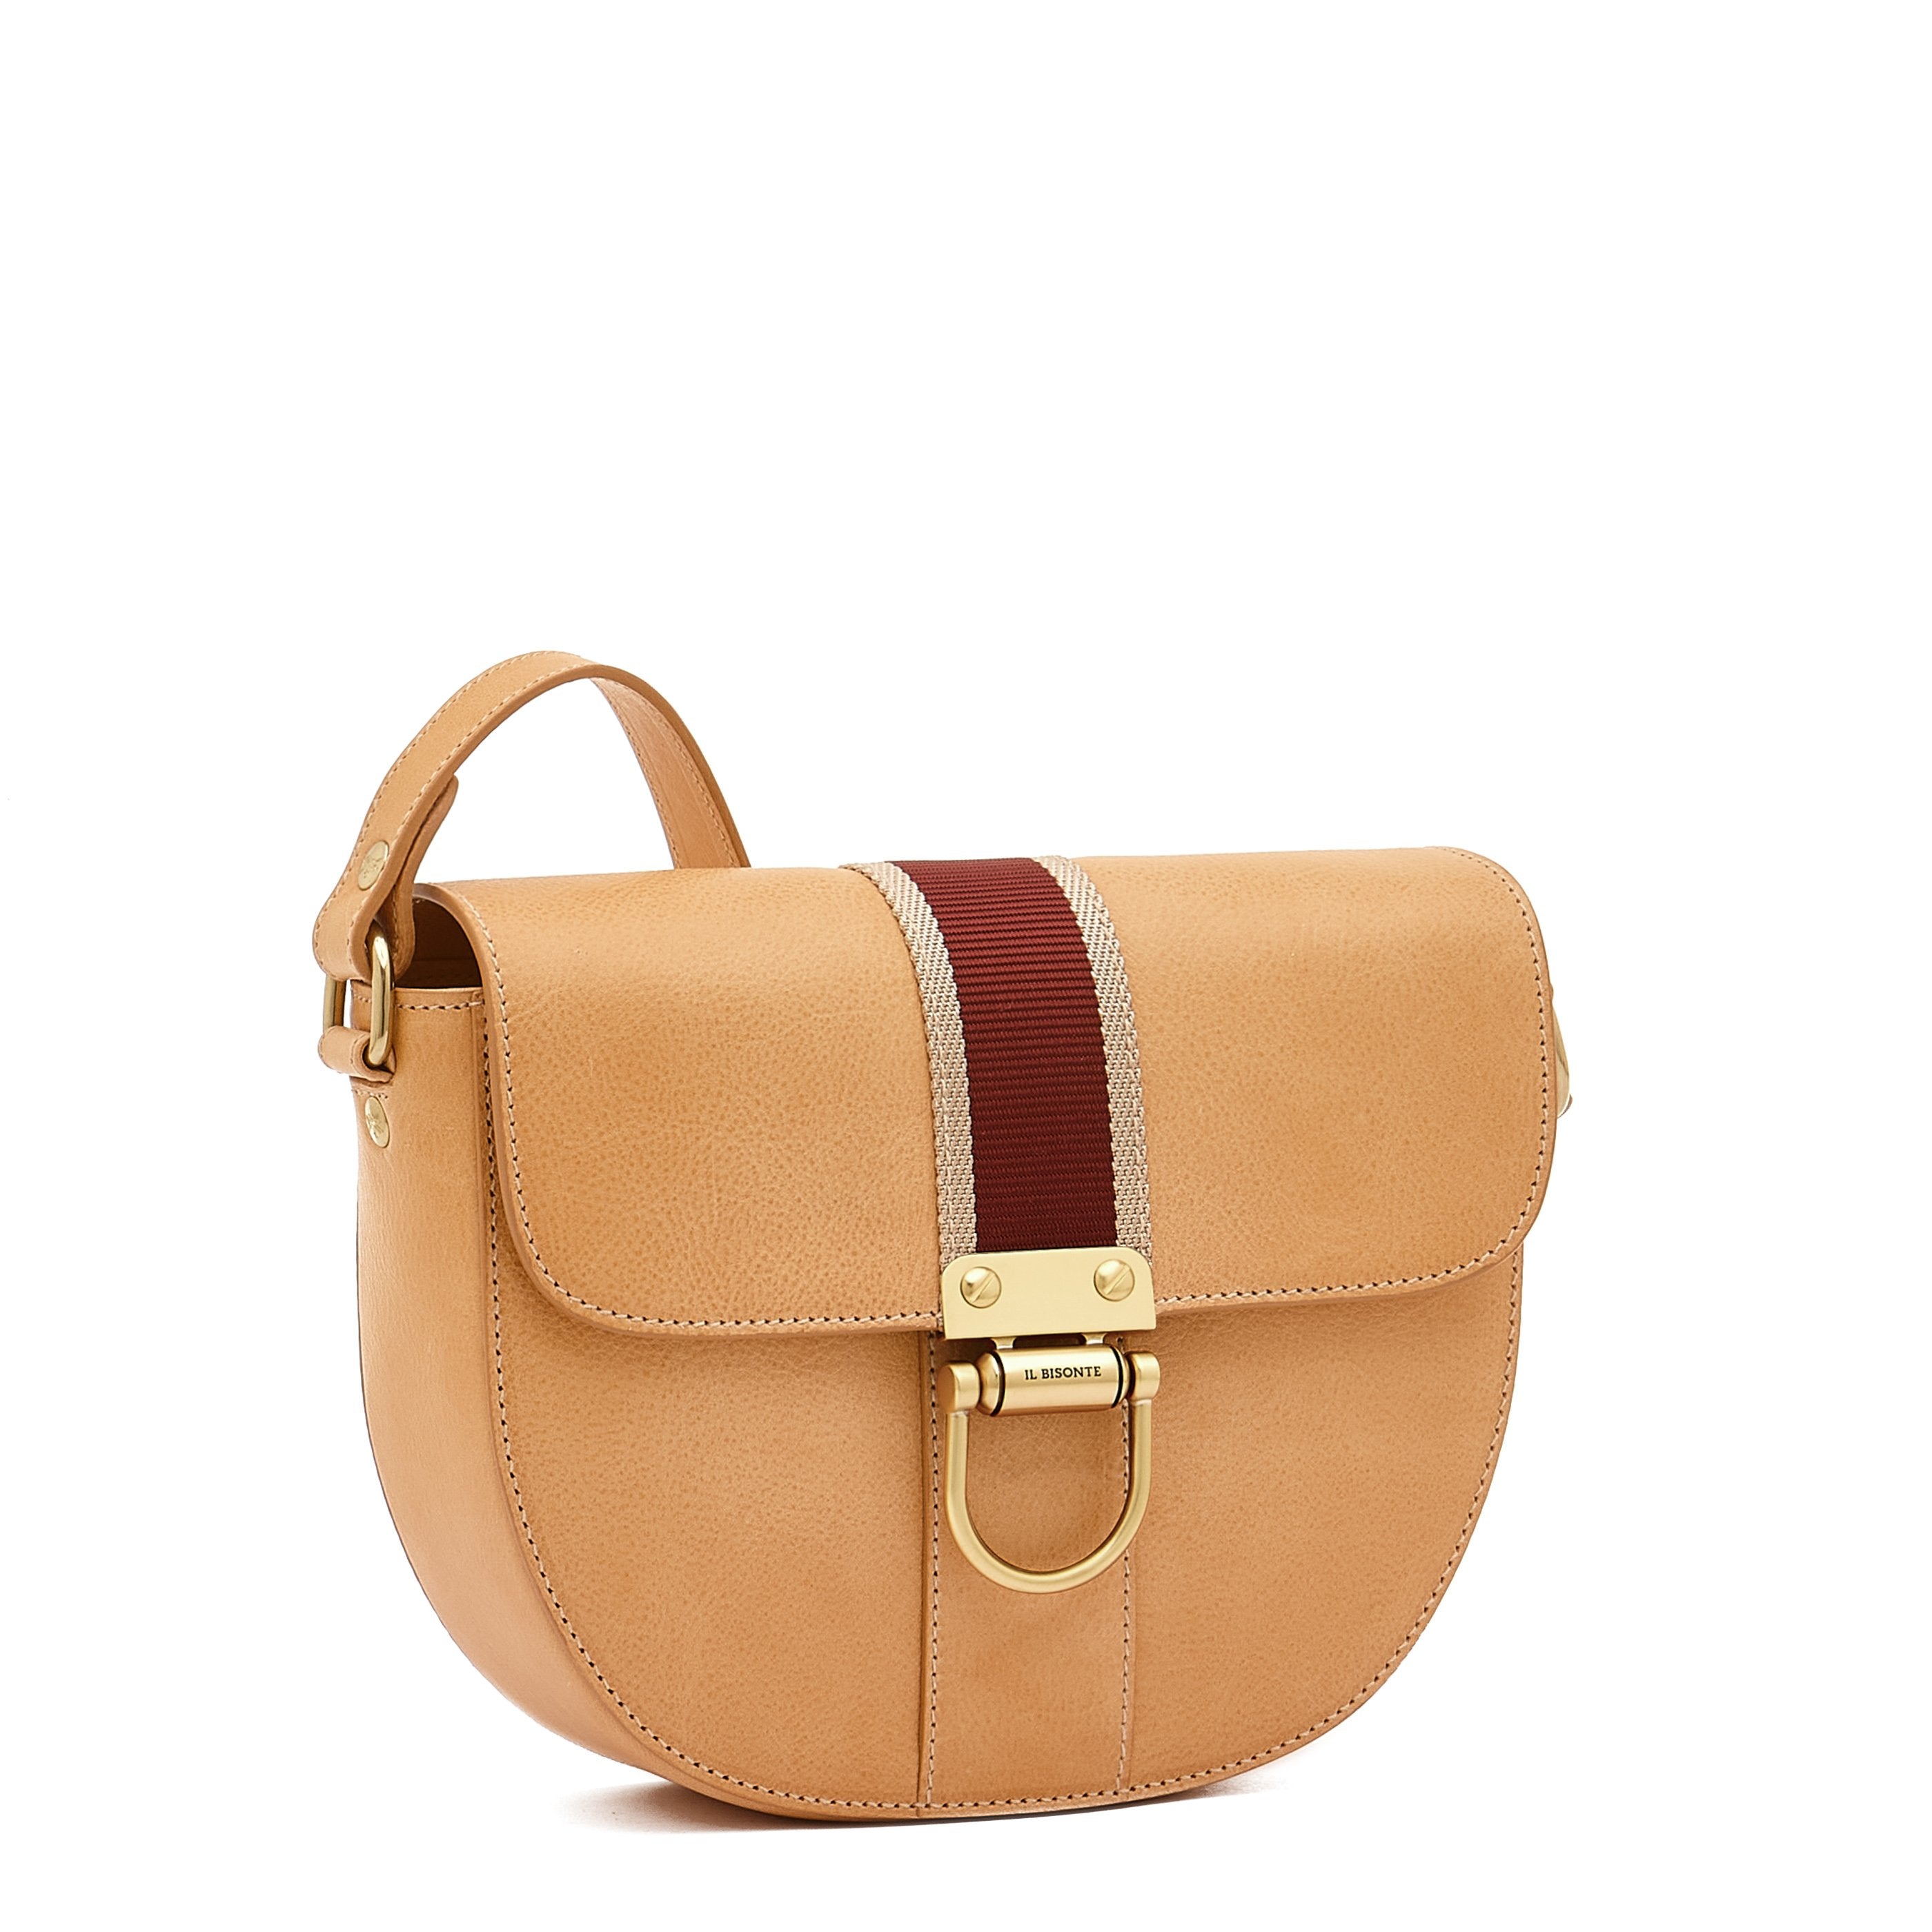 Solaria | Women's crossbody bag in leather color natural